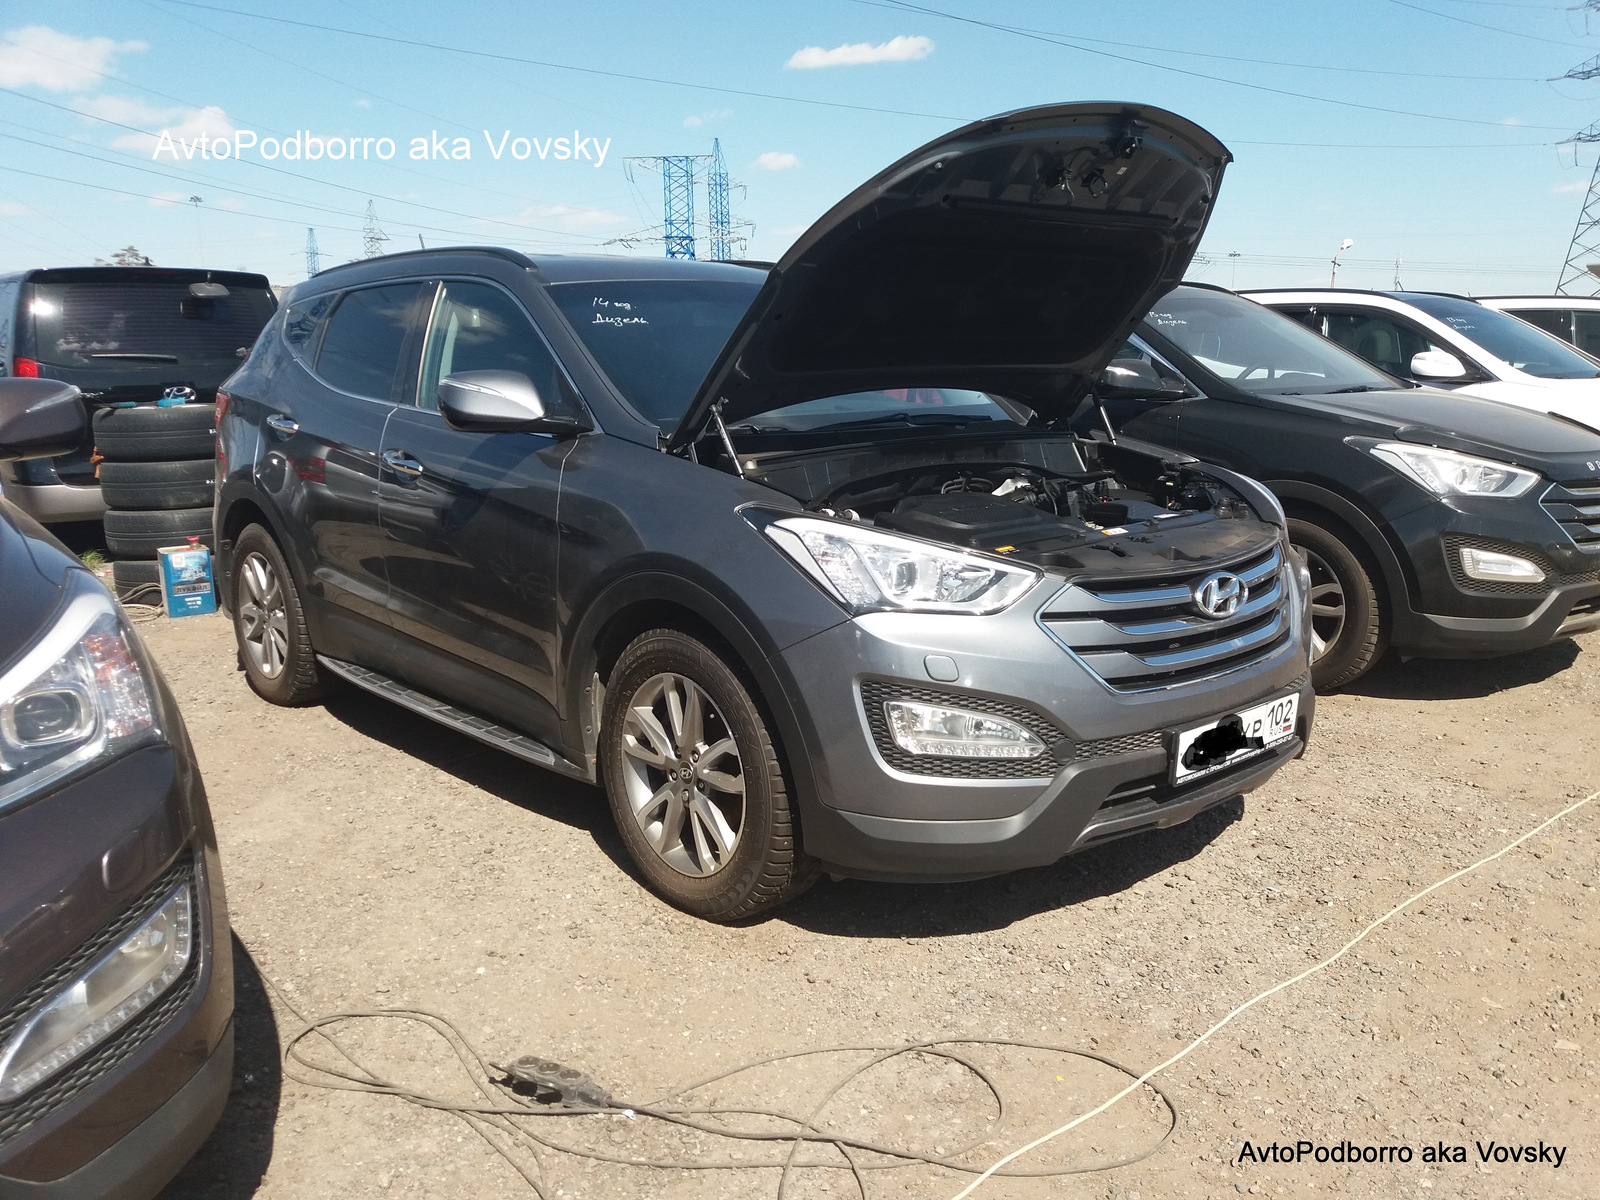 Searching for a good car, coiled mileage in 90% of the car. - My, Resellers, Autoselection, Autosearch, Volkswagen Touareg, Mileage, Diagnostics, My, Video, Longpost